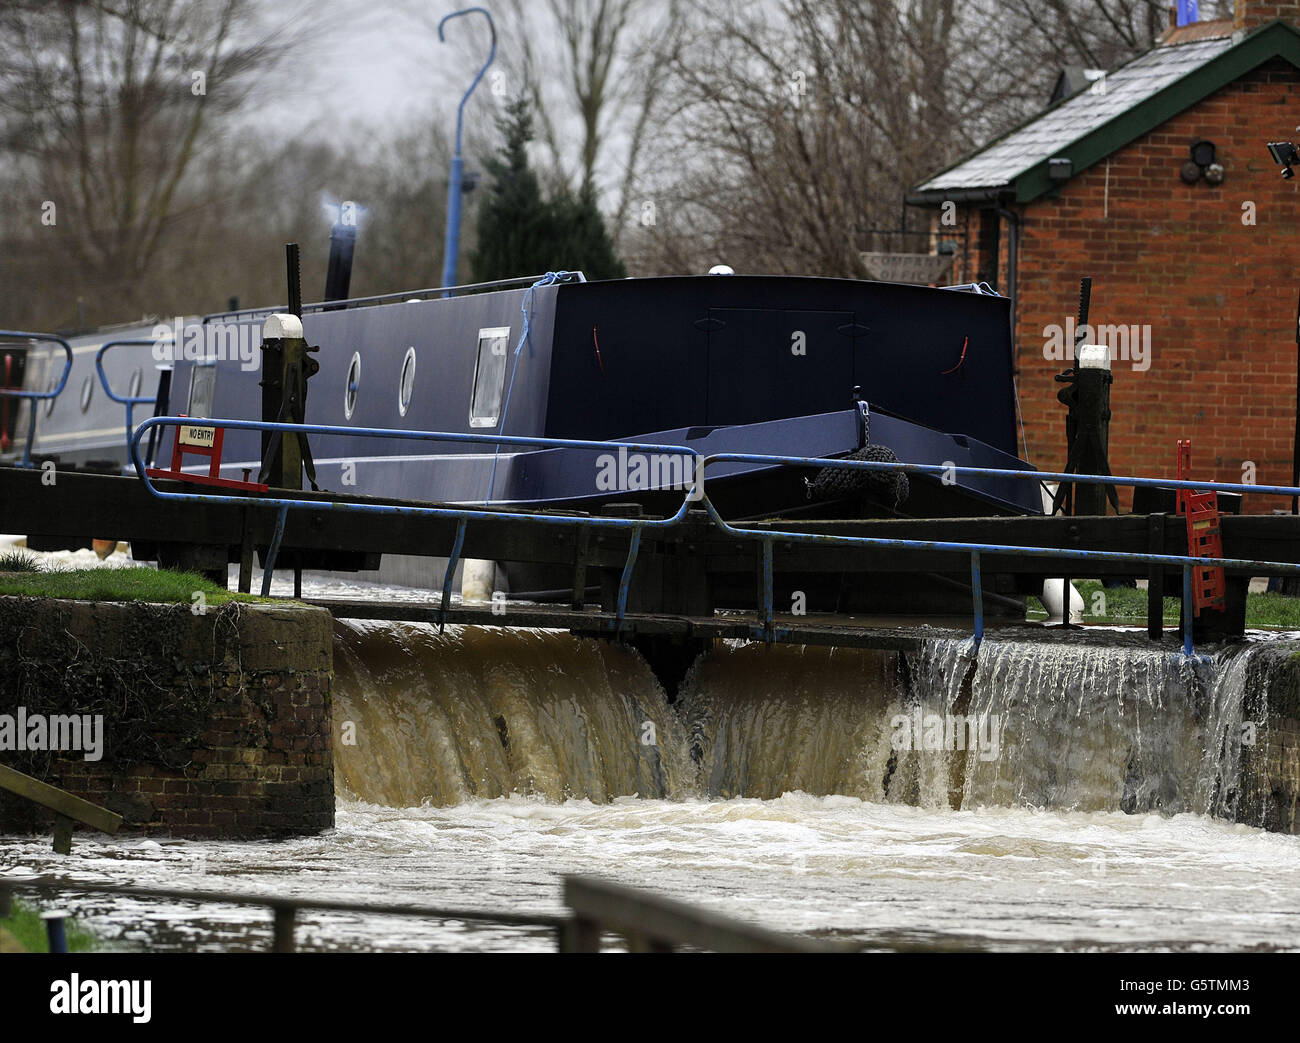 Flood water from recent snow melt bursts over the lock gates of the River Chelmer at Paper Mill Lock, Little Baddow, Essex. Stock Photo